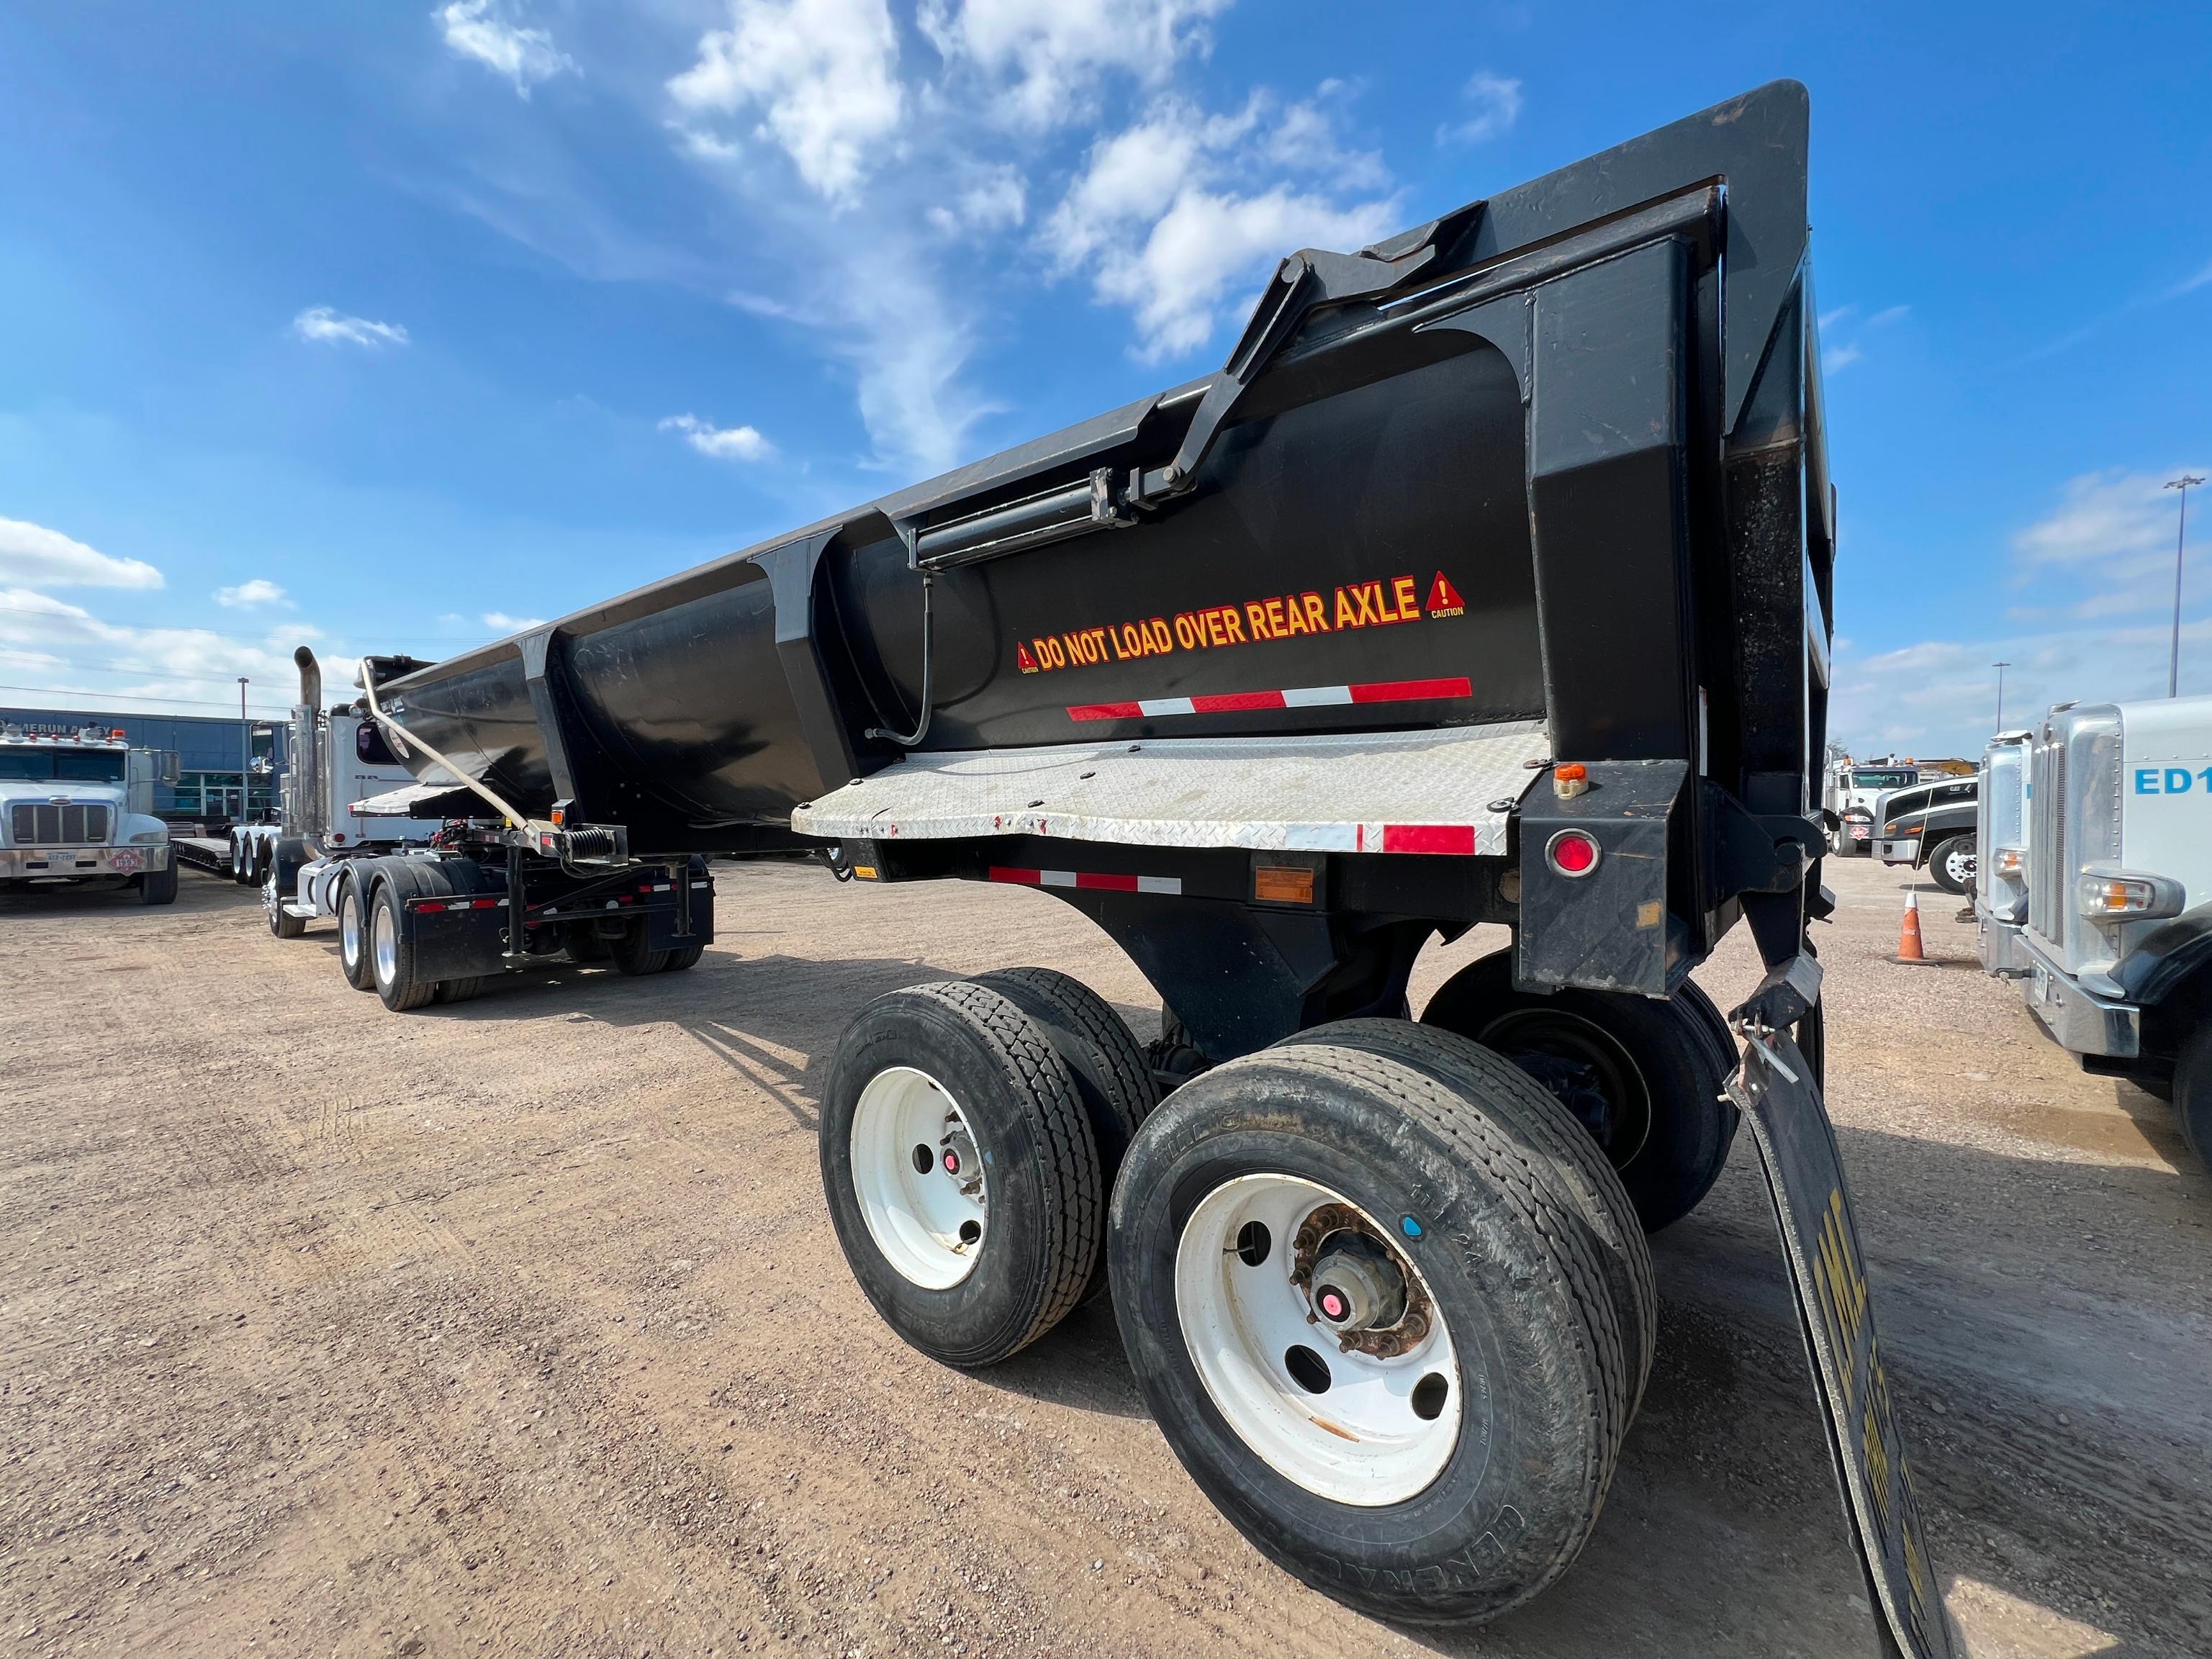 2017 RANCO ED26-34 DUMP TRAILER VN:1UNSD3423HL153152 equipped with 34ft. Dump body, 26 yard